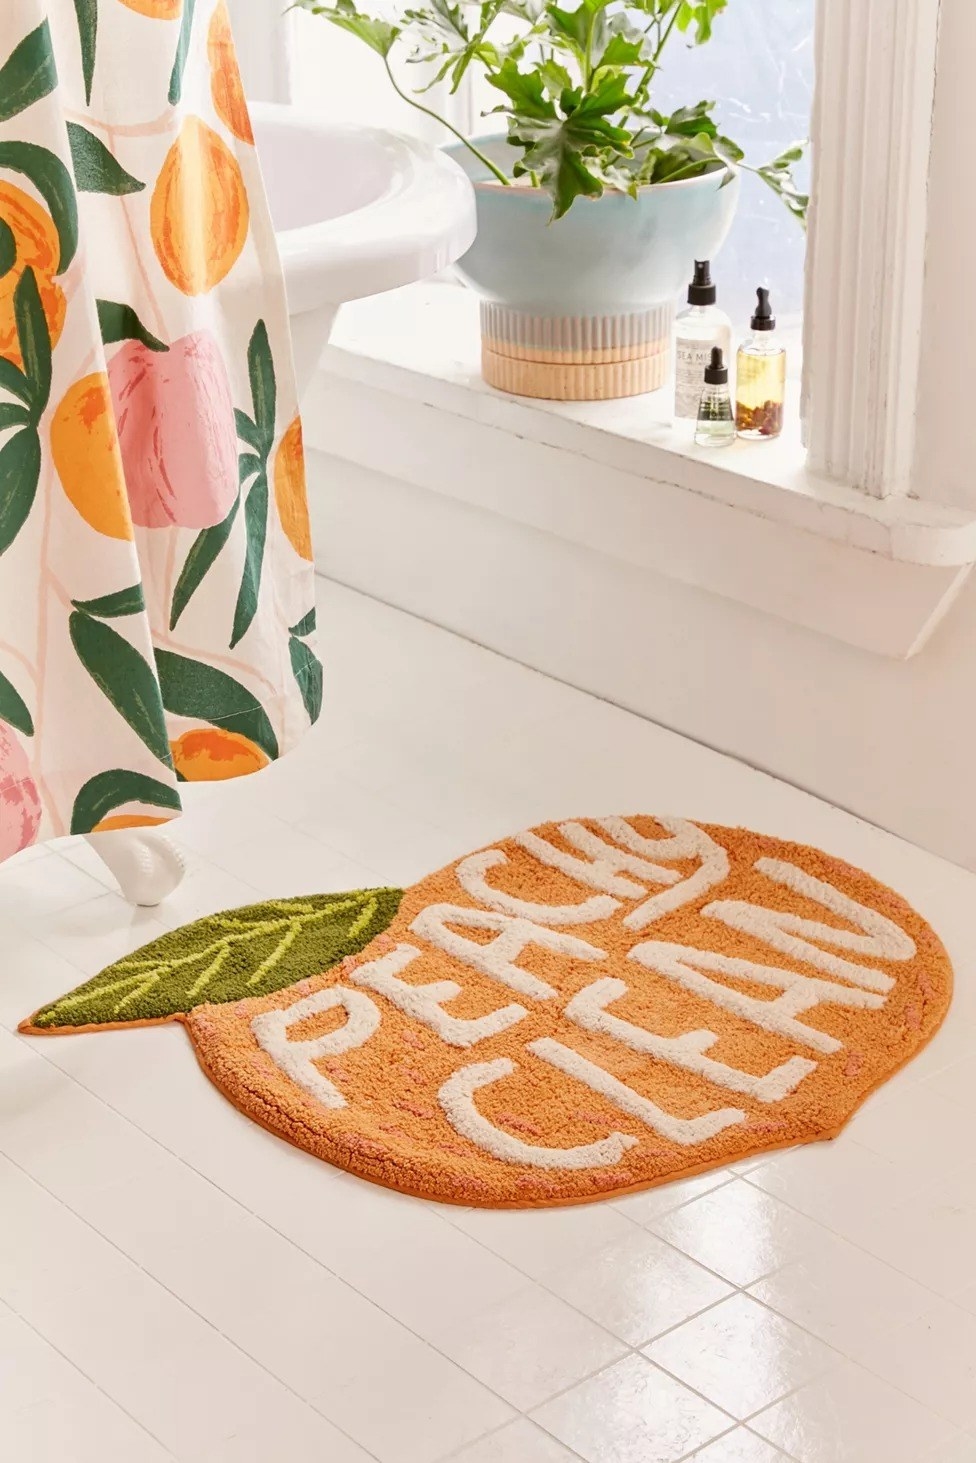 the bath mat on the floor in the shape of a peach that says &quot;peachy clean&quot;